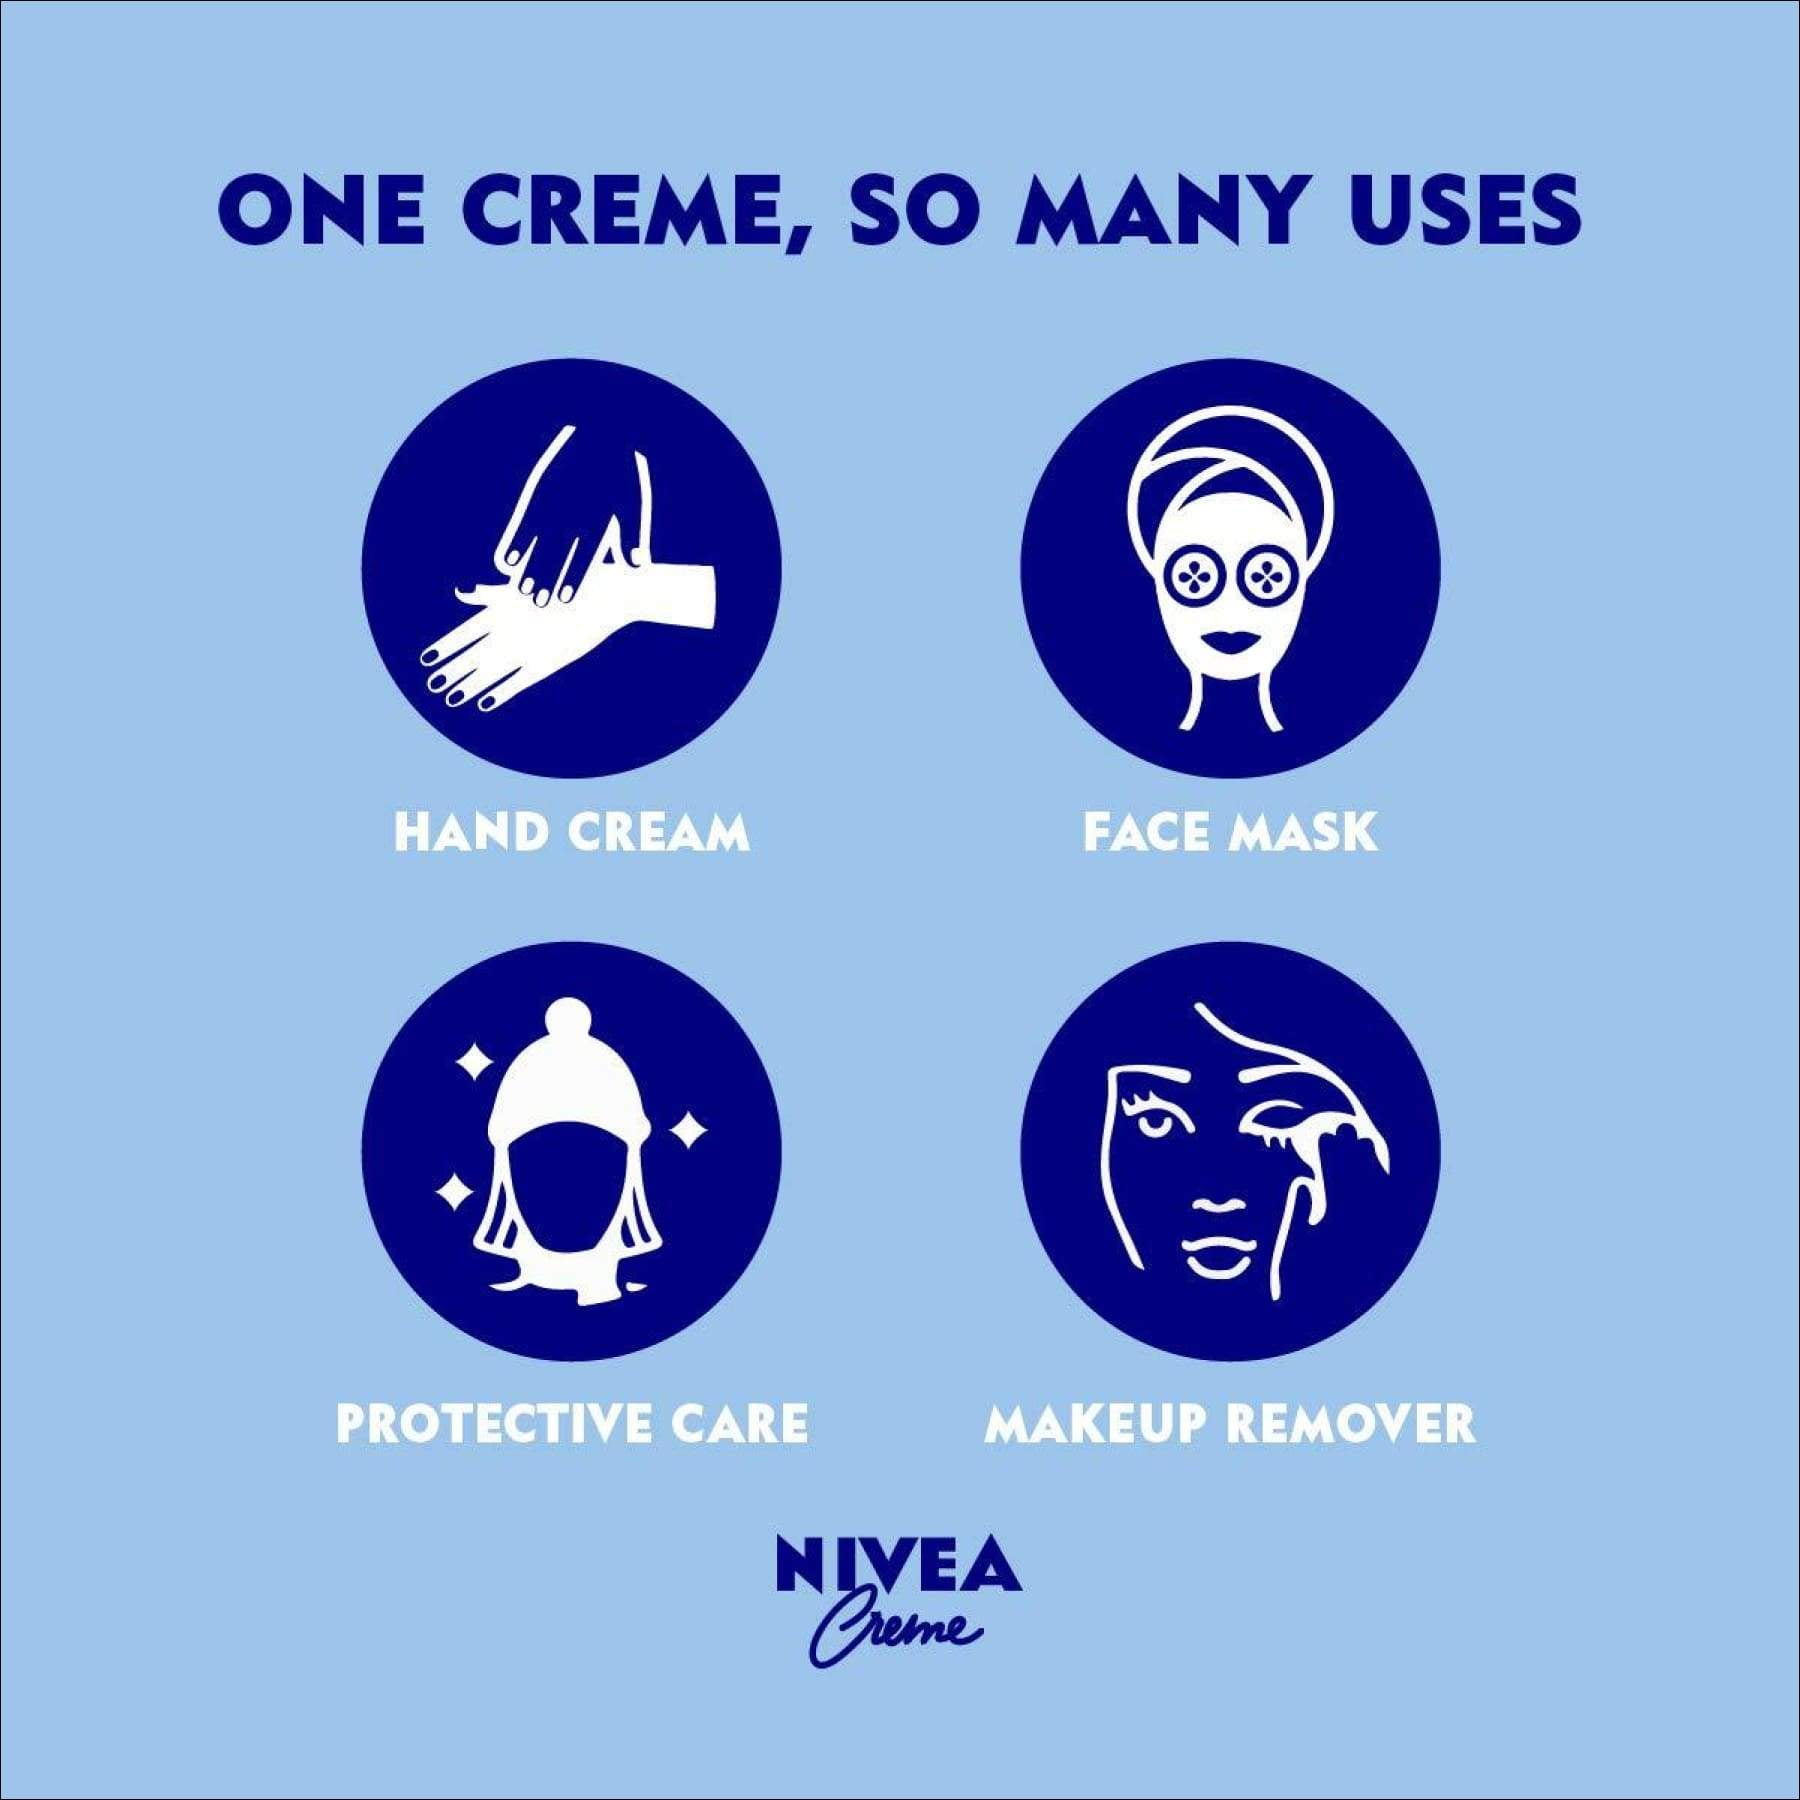 NIVEA - Unisex All Purpose Moisturizing Cream for Body, Face and Hand Care - Use After Washing With Hand Soap - 13.5 oz. Tin Jar Pack of 1 - Walmart.com